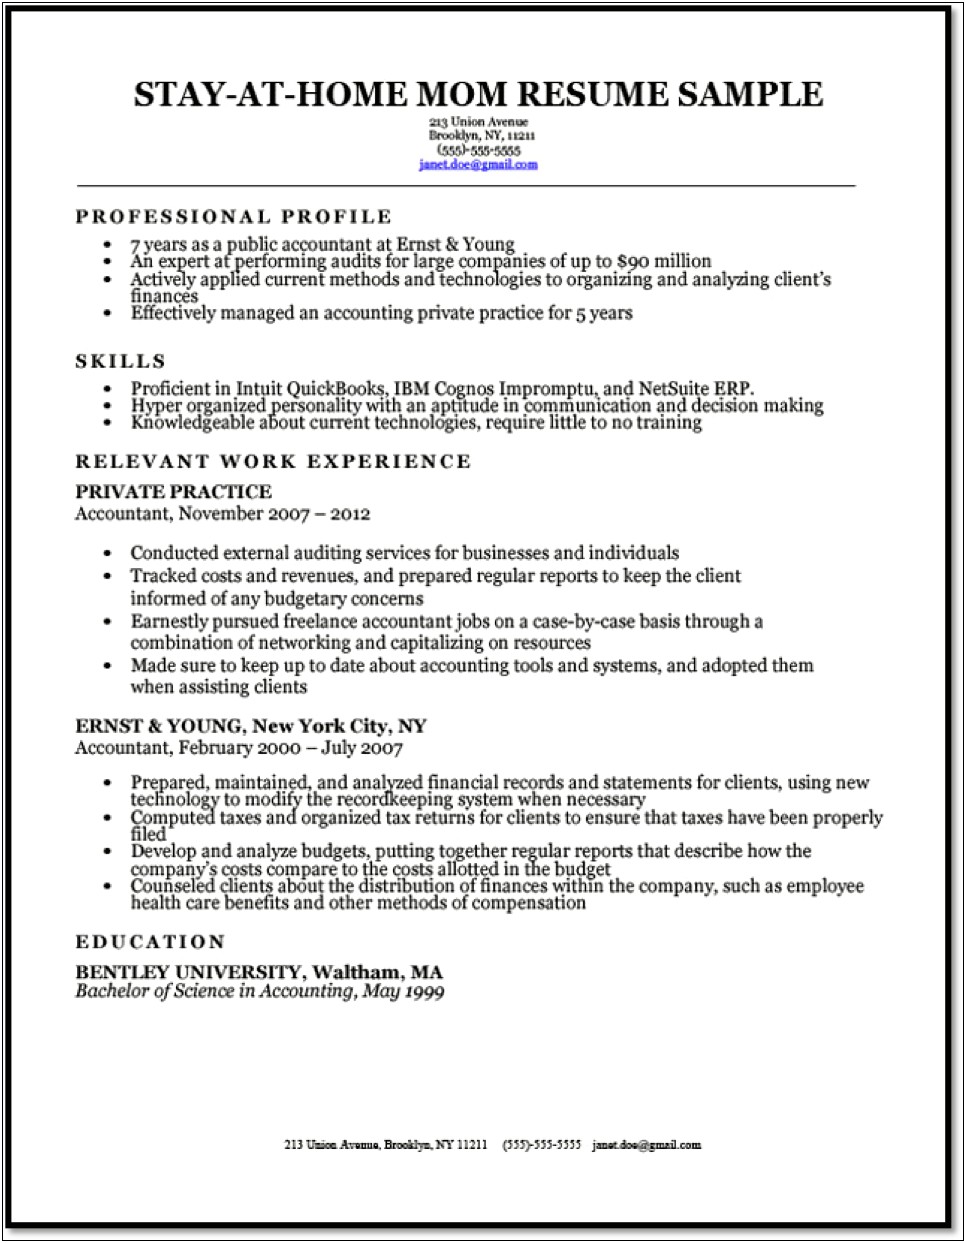 Resumes For Stay Home Moms Returning To Work